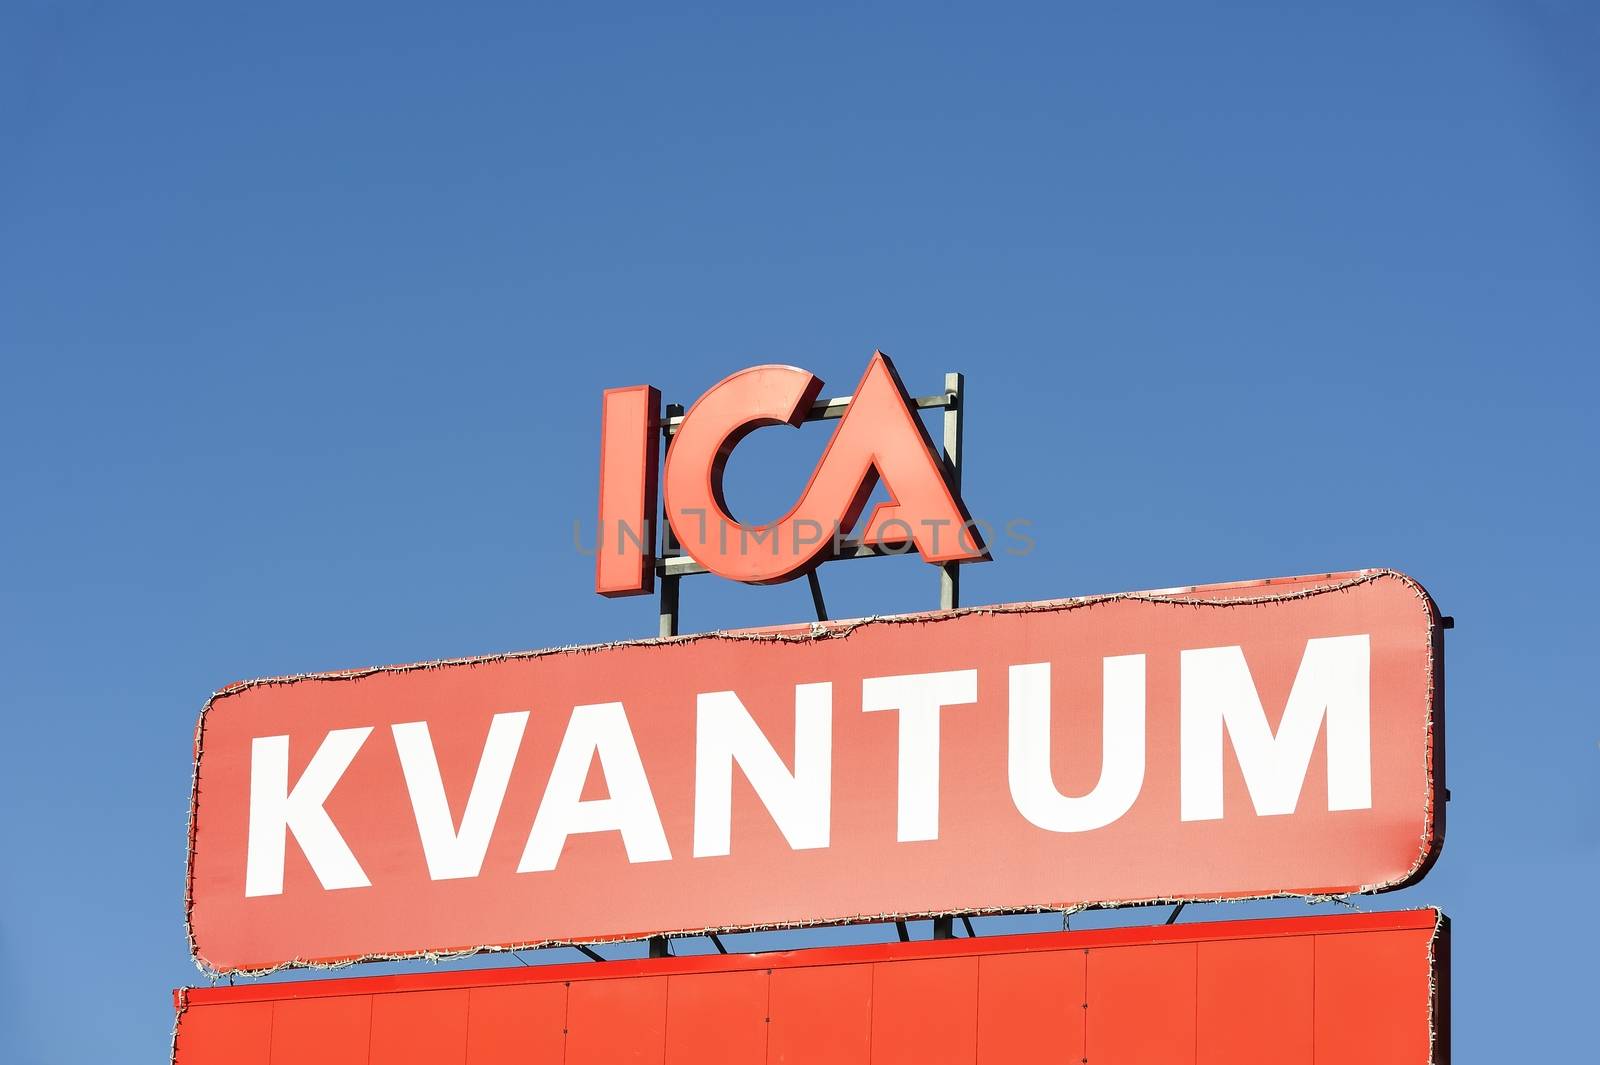 ICA sign by a40757